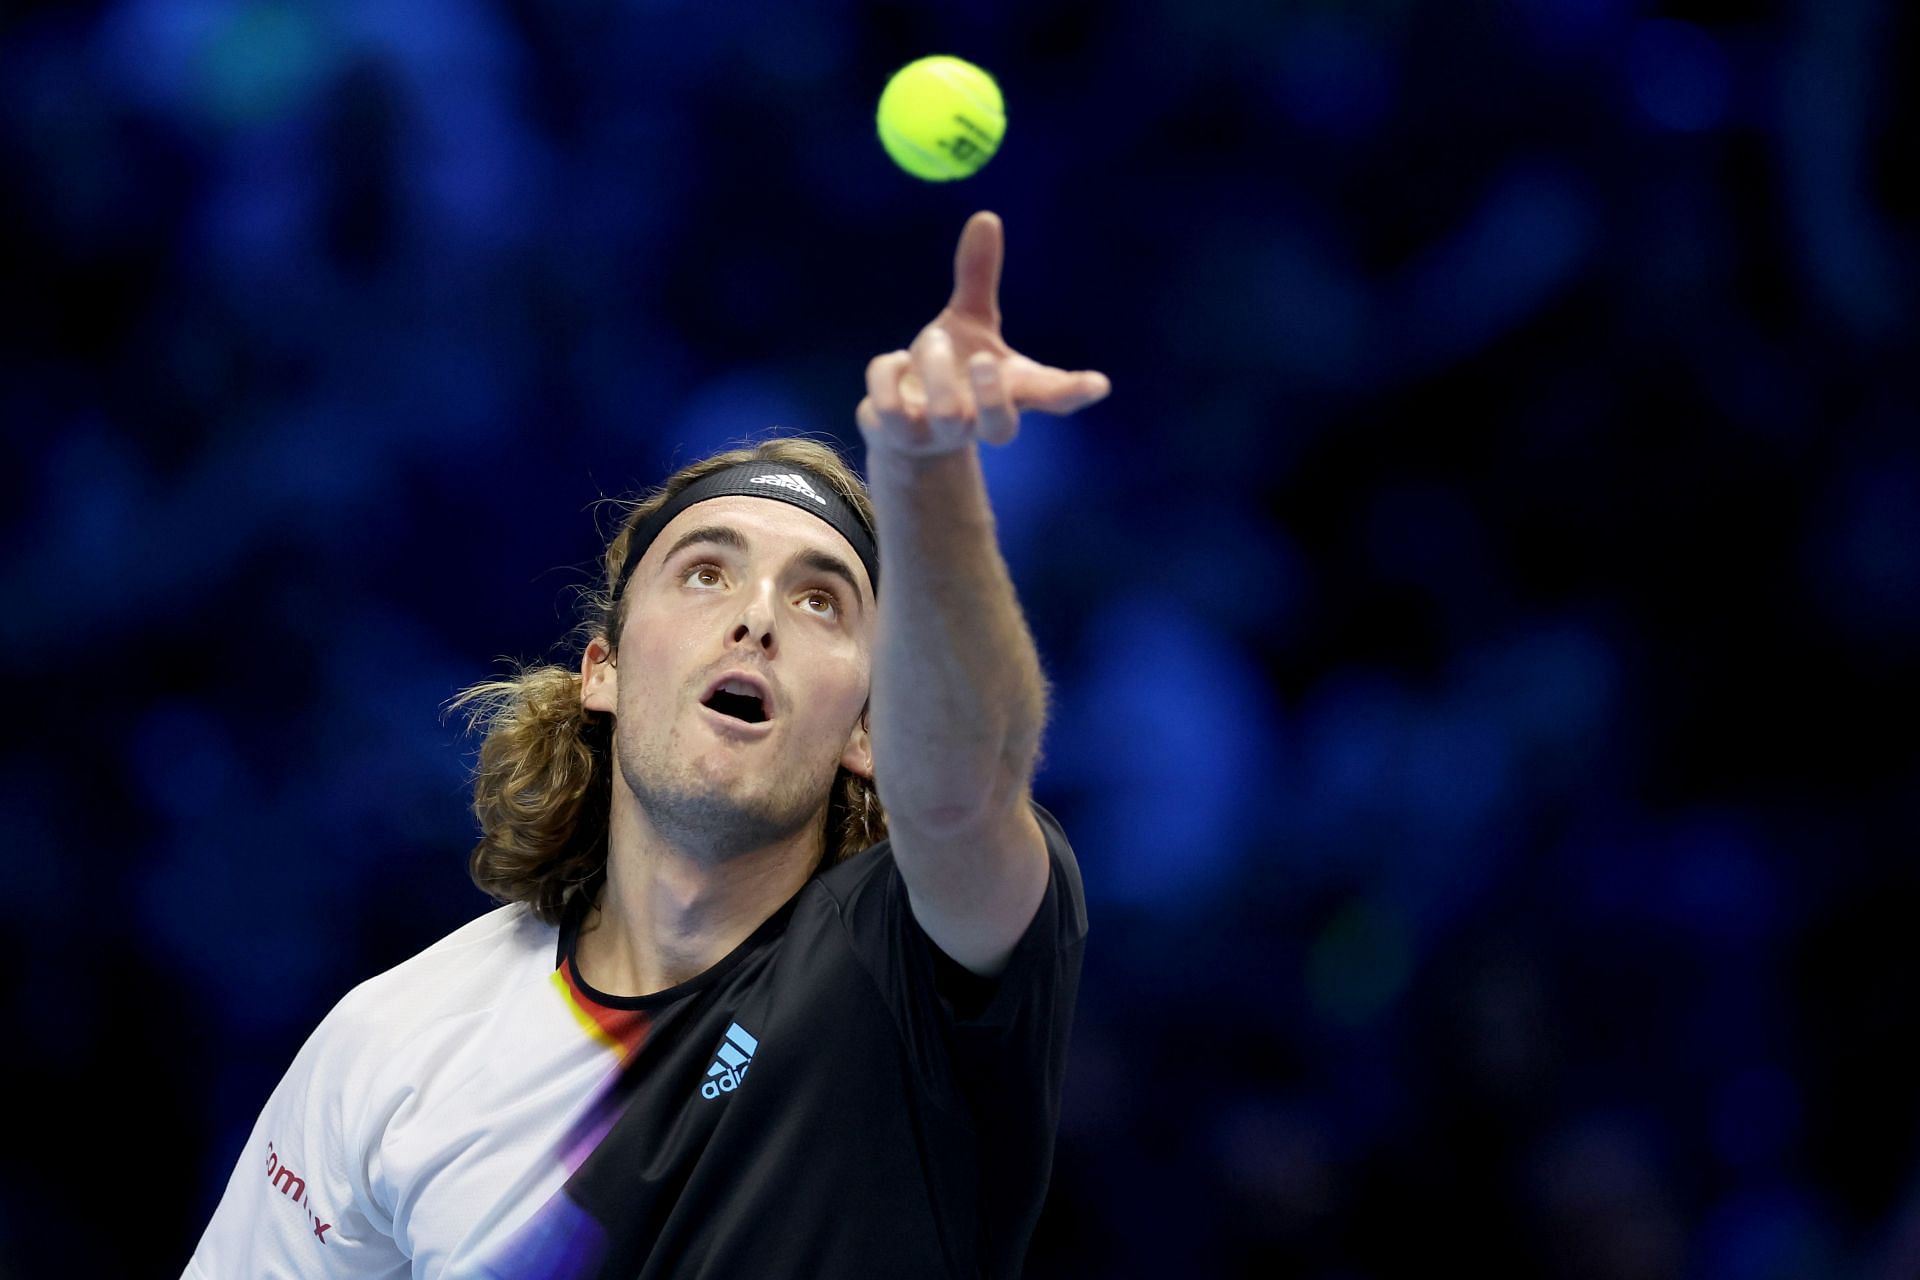 Stefanos Tsitsipas is currently ranked third in the ATP rankings